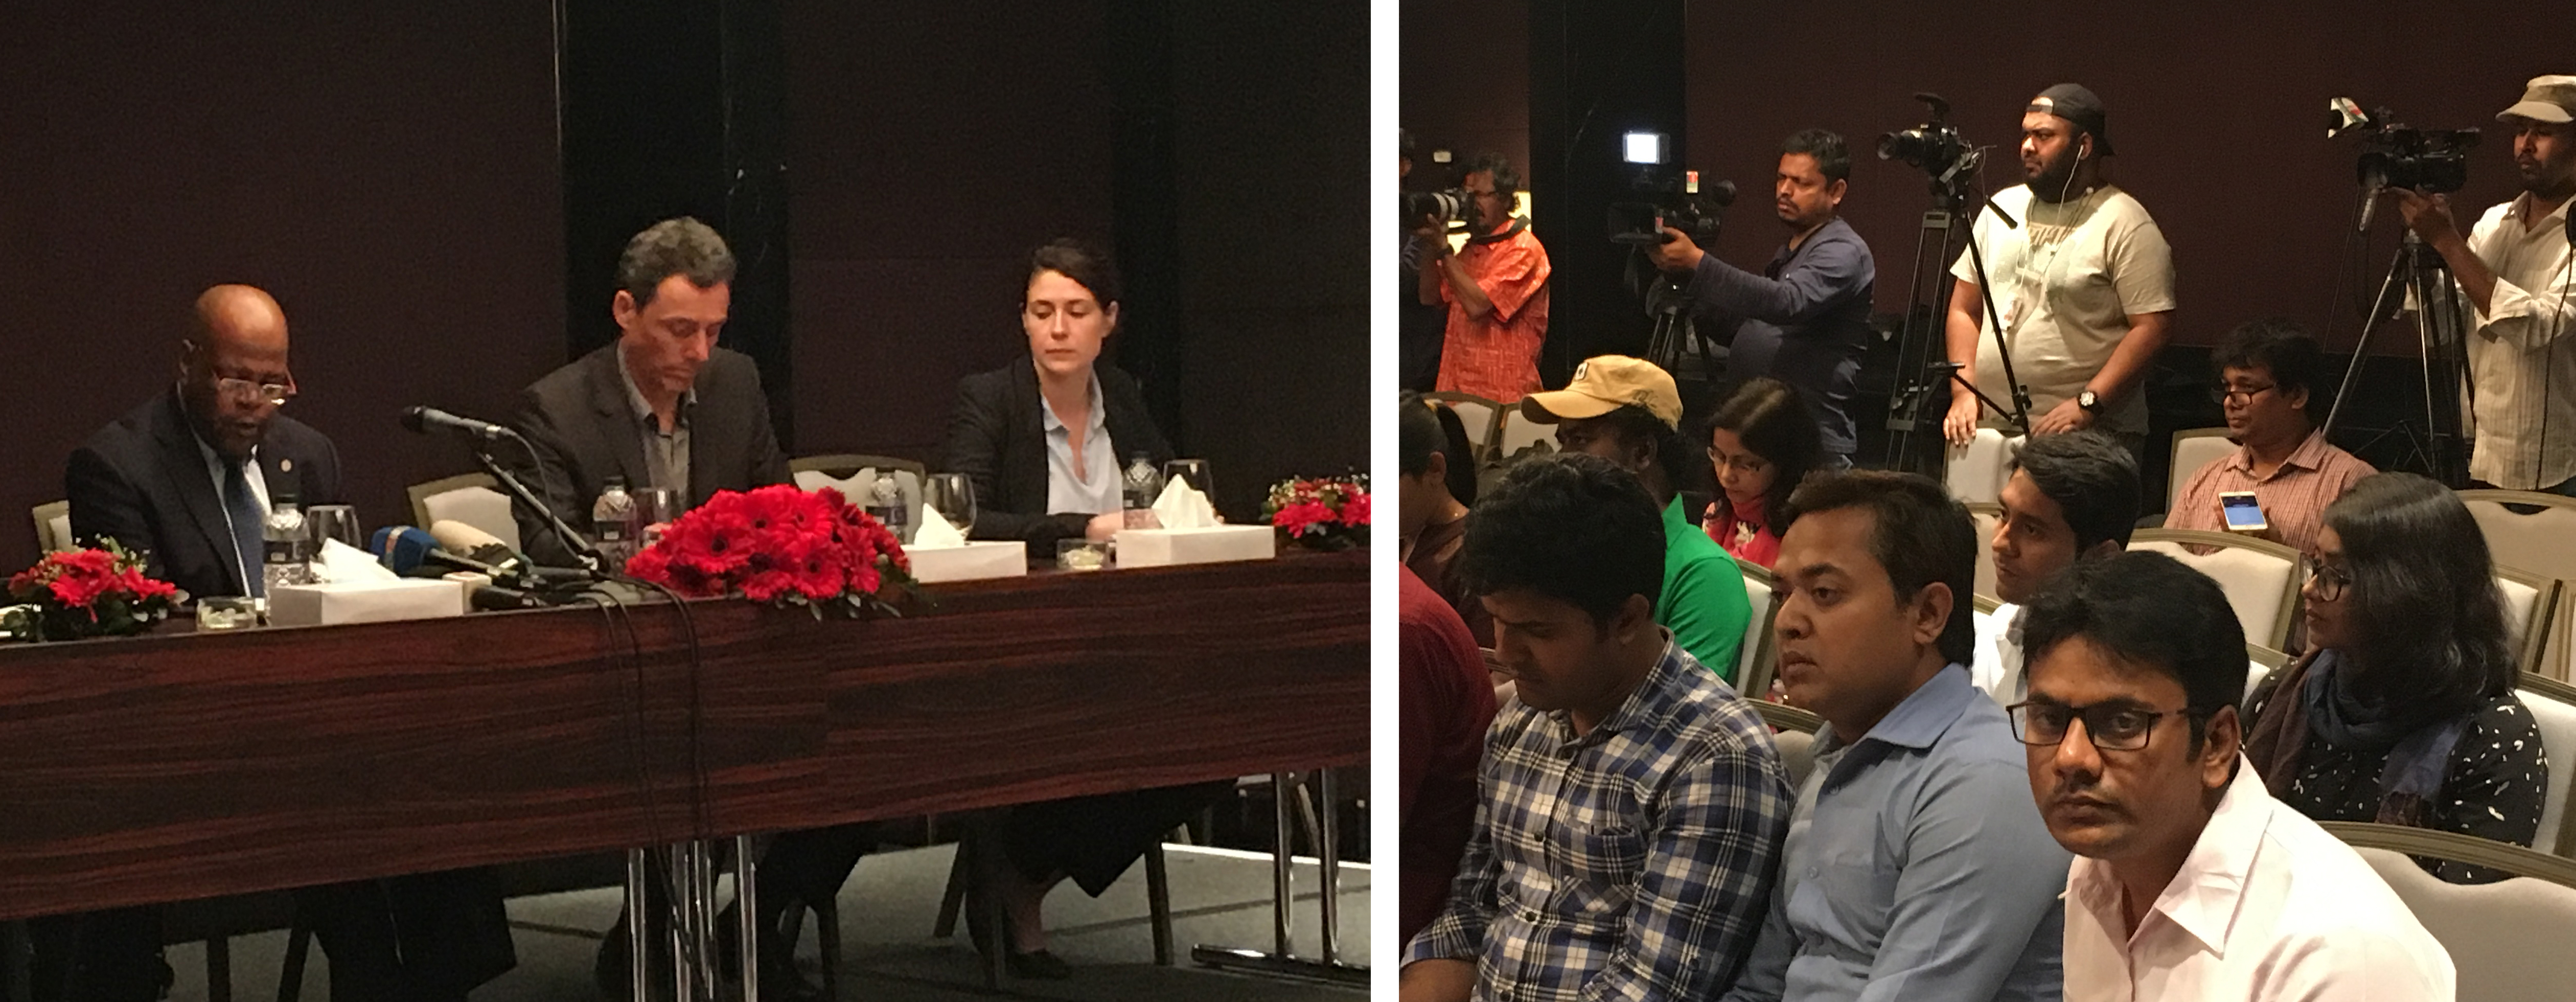 Delegation from the Office of the Prosecutor of the ICC holds press conference at the conclusion of first visit to Bangladesh